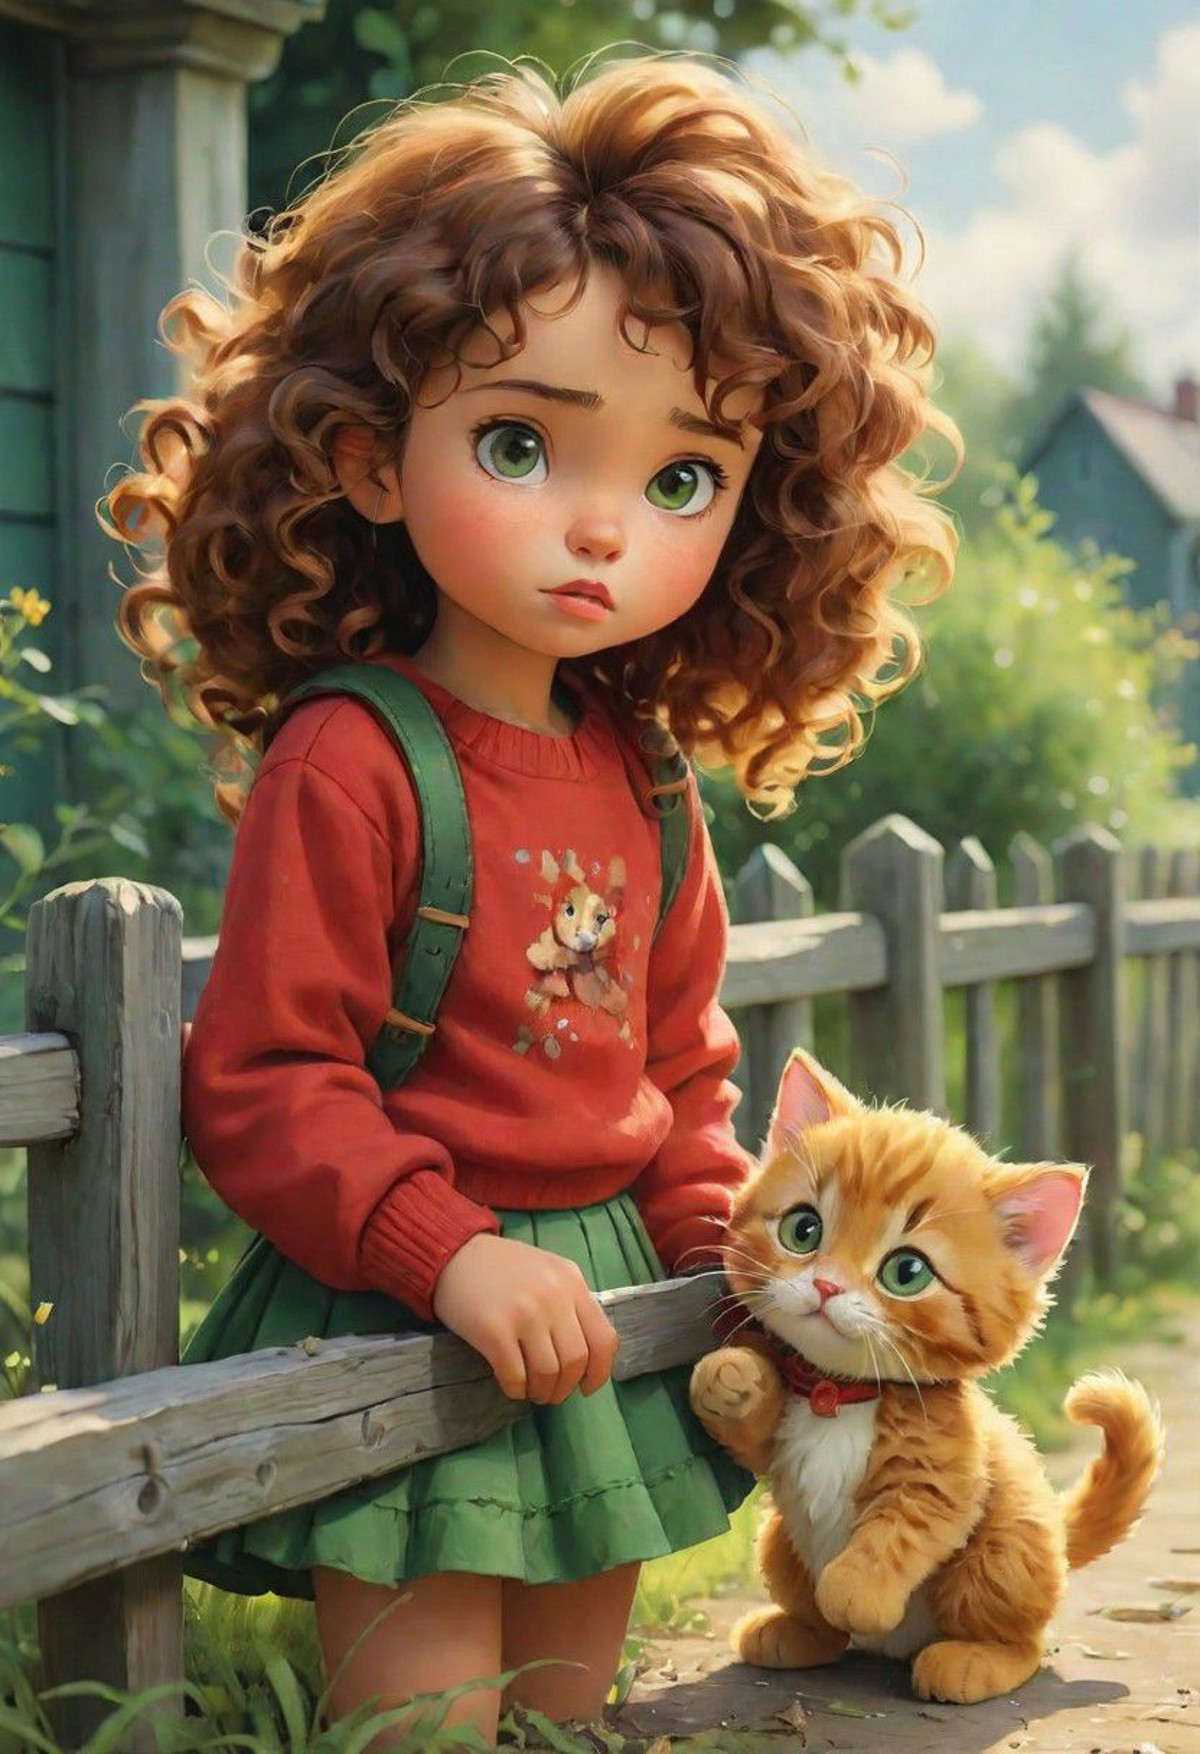 Cute Little girl with curly hair holding toy teddy, she's dressed in a red jumper, green skirt.  She's leaning against a b...